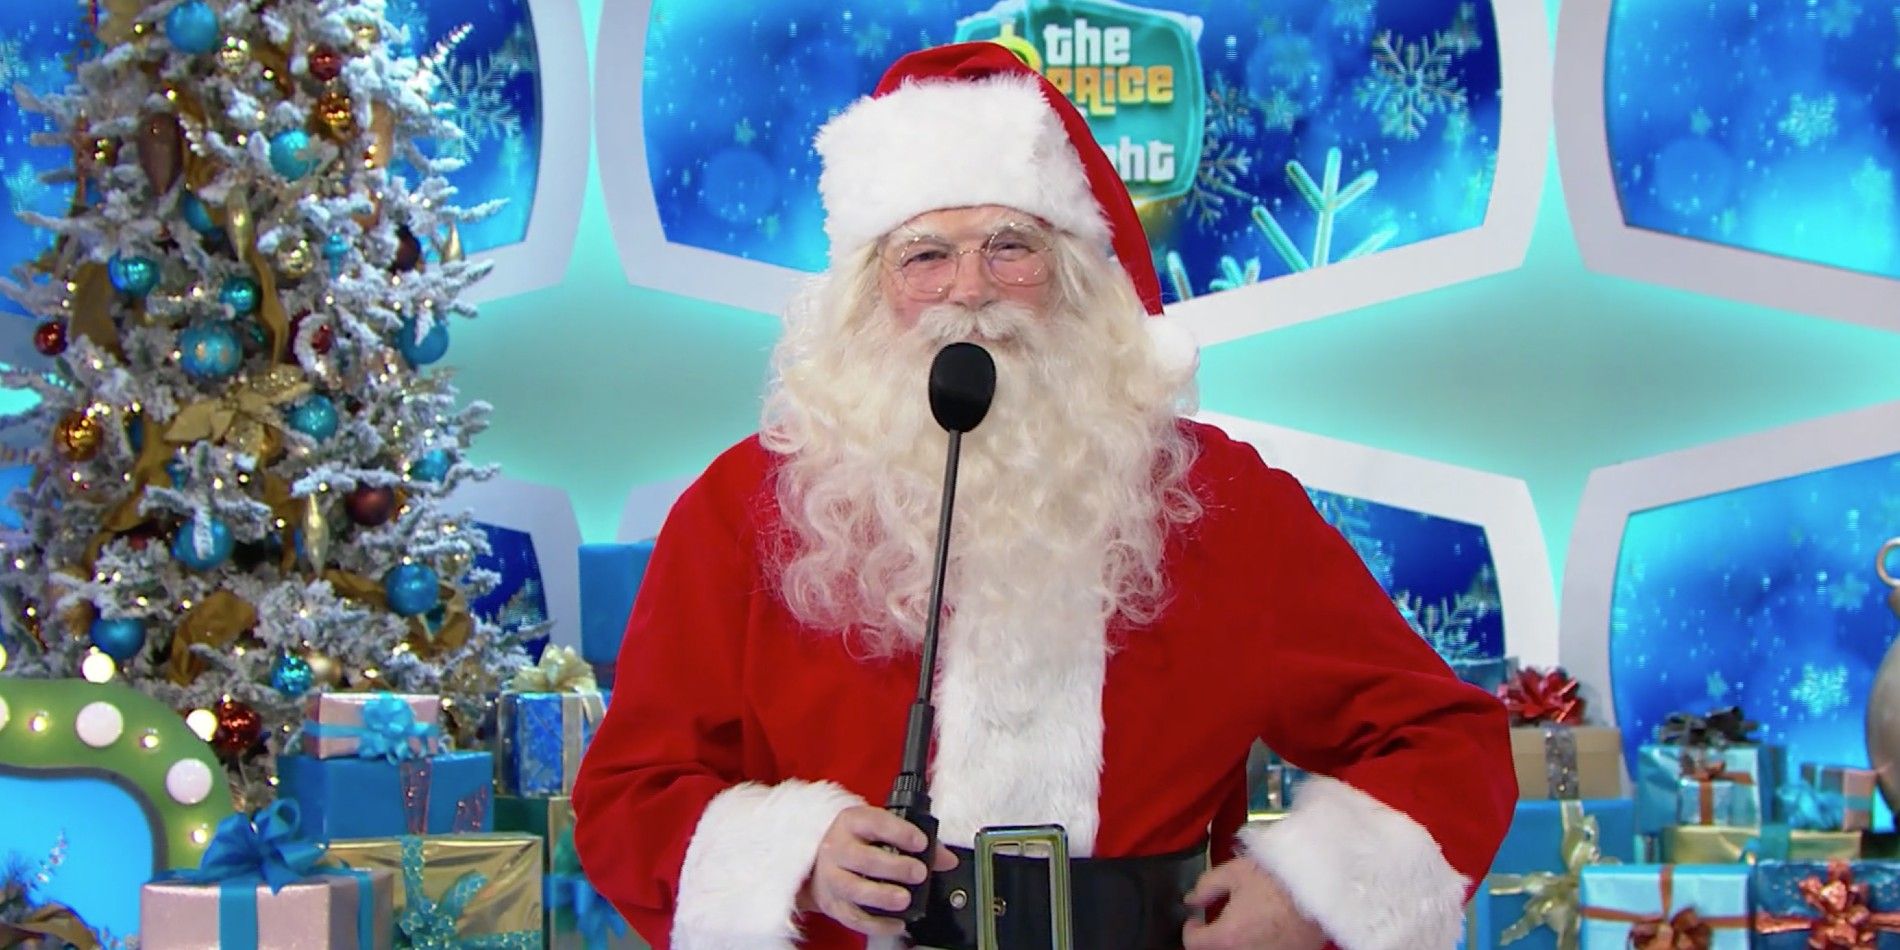 The Price Is Right Holiday Episode Drew Carey Santa